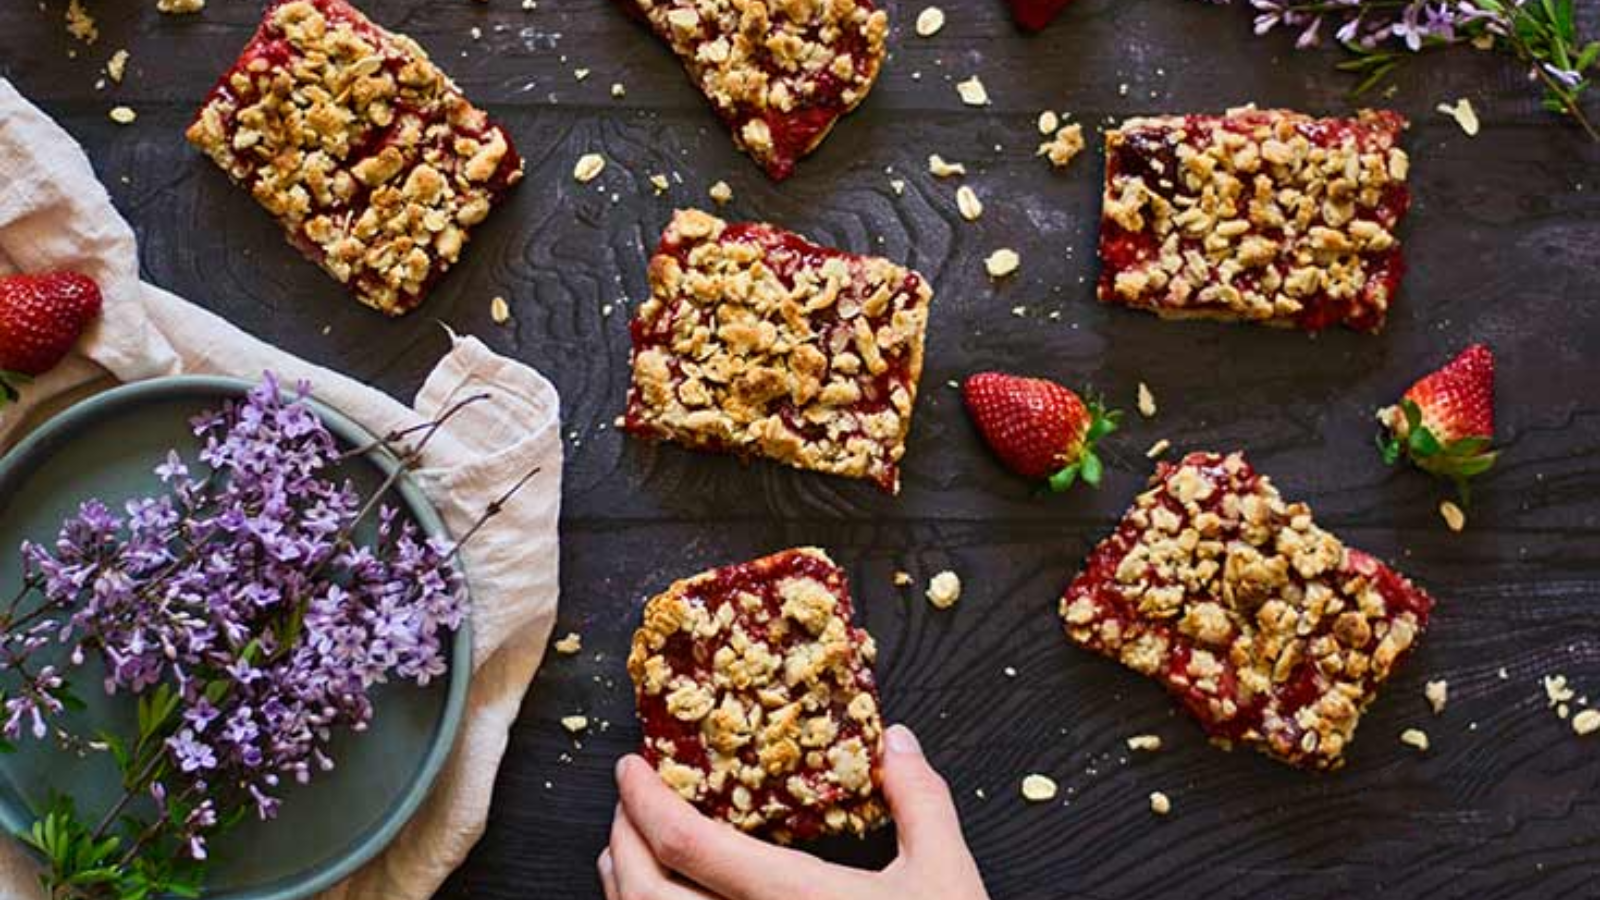 16 Healthy Desserts You Can Feel Good About Eating